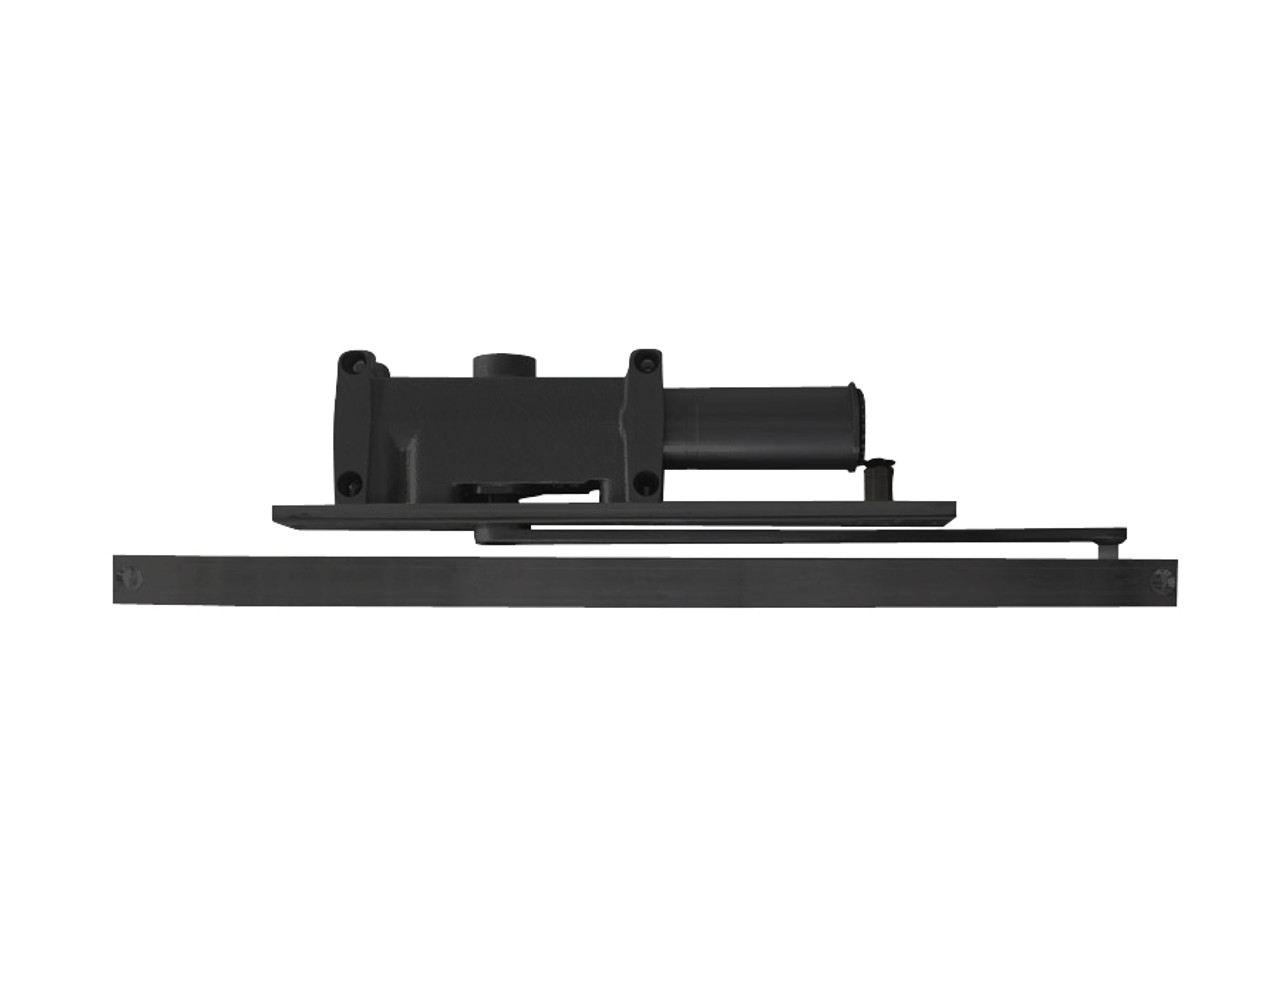 2015-H-RH-BLACK LCN Door Closer with Hold Open Arm in Black Finish